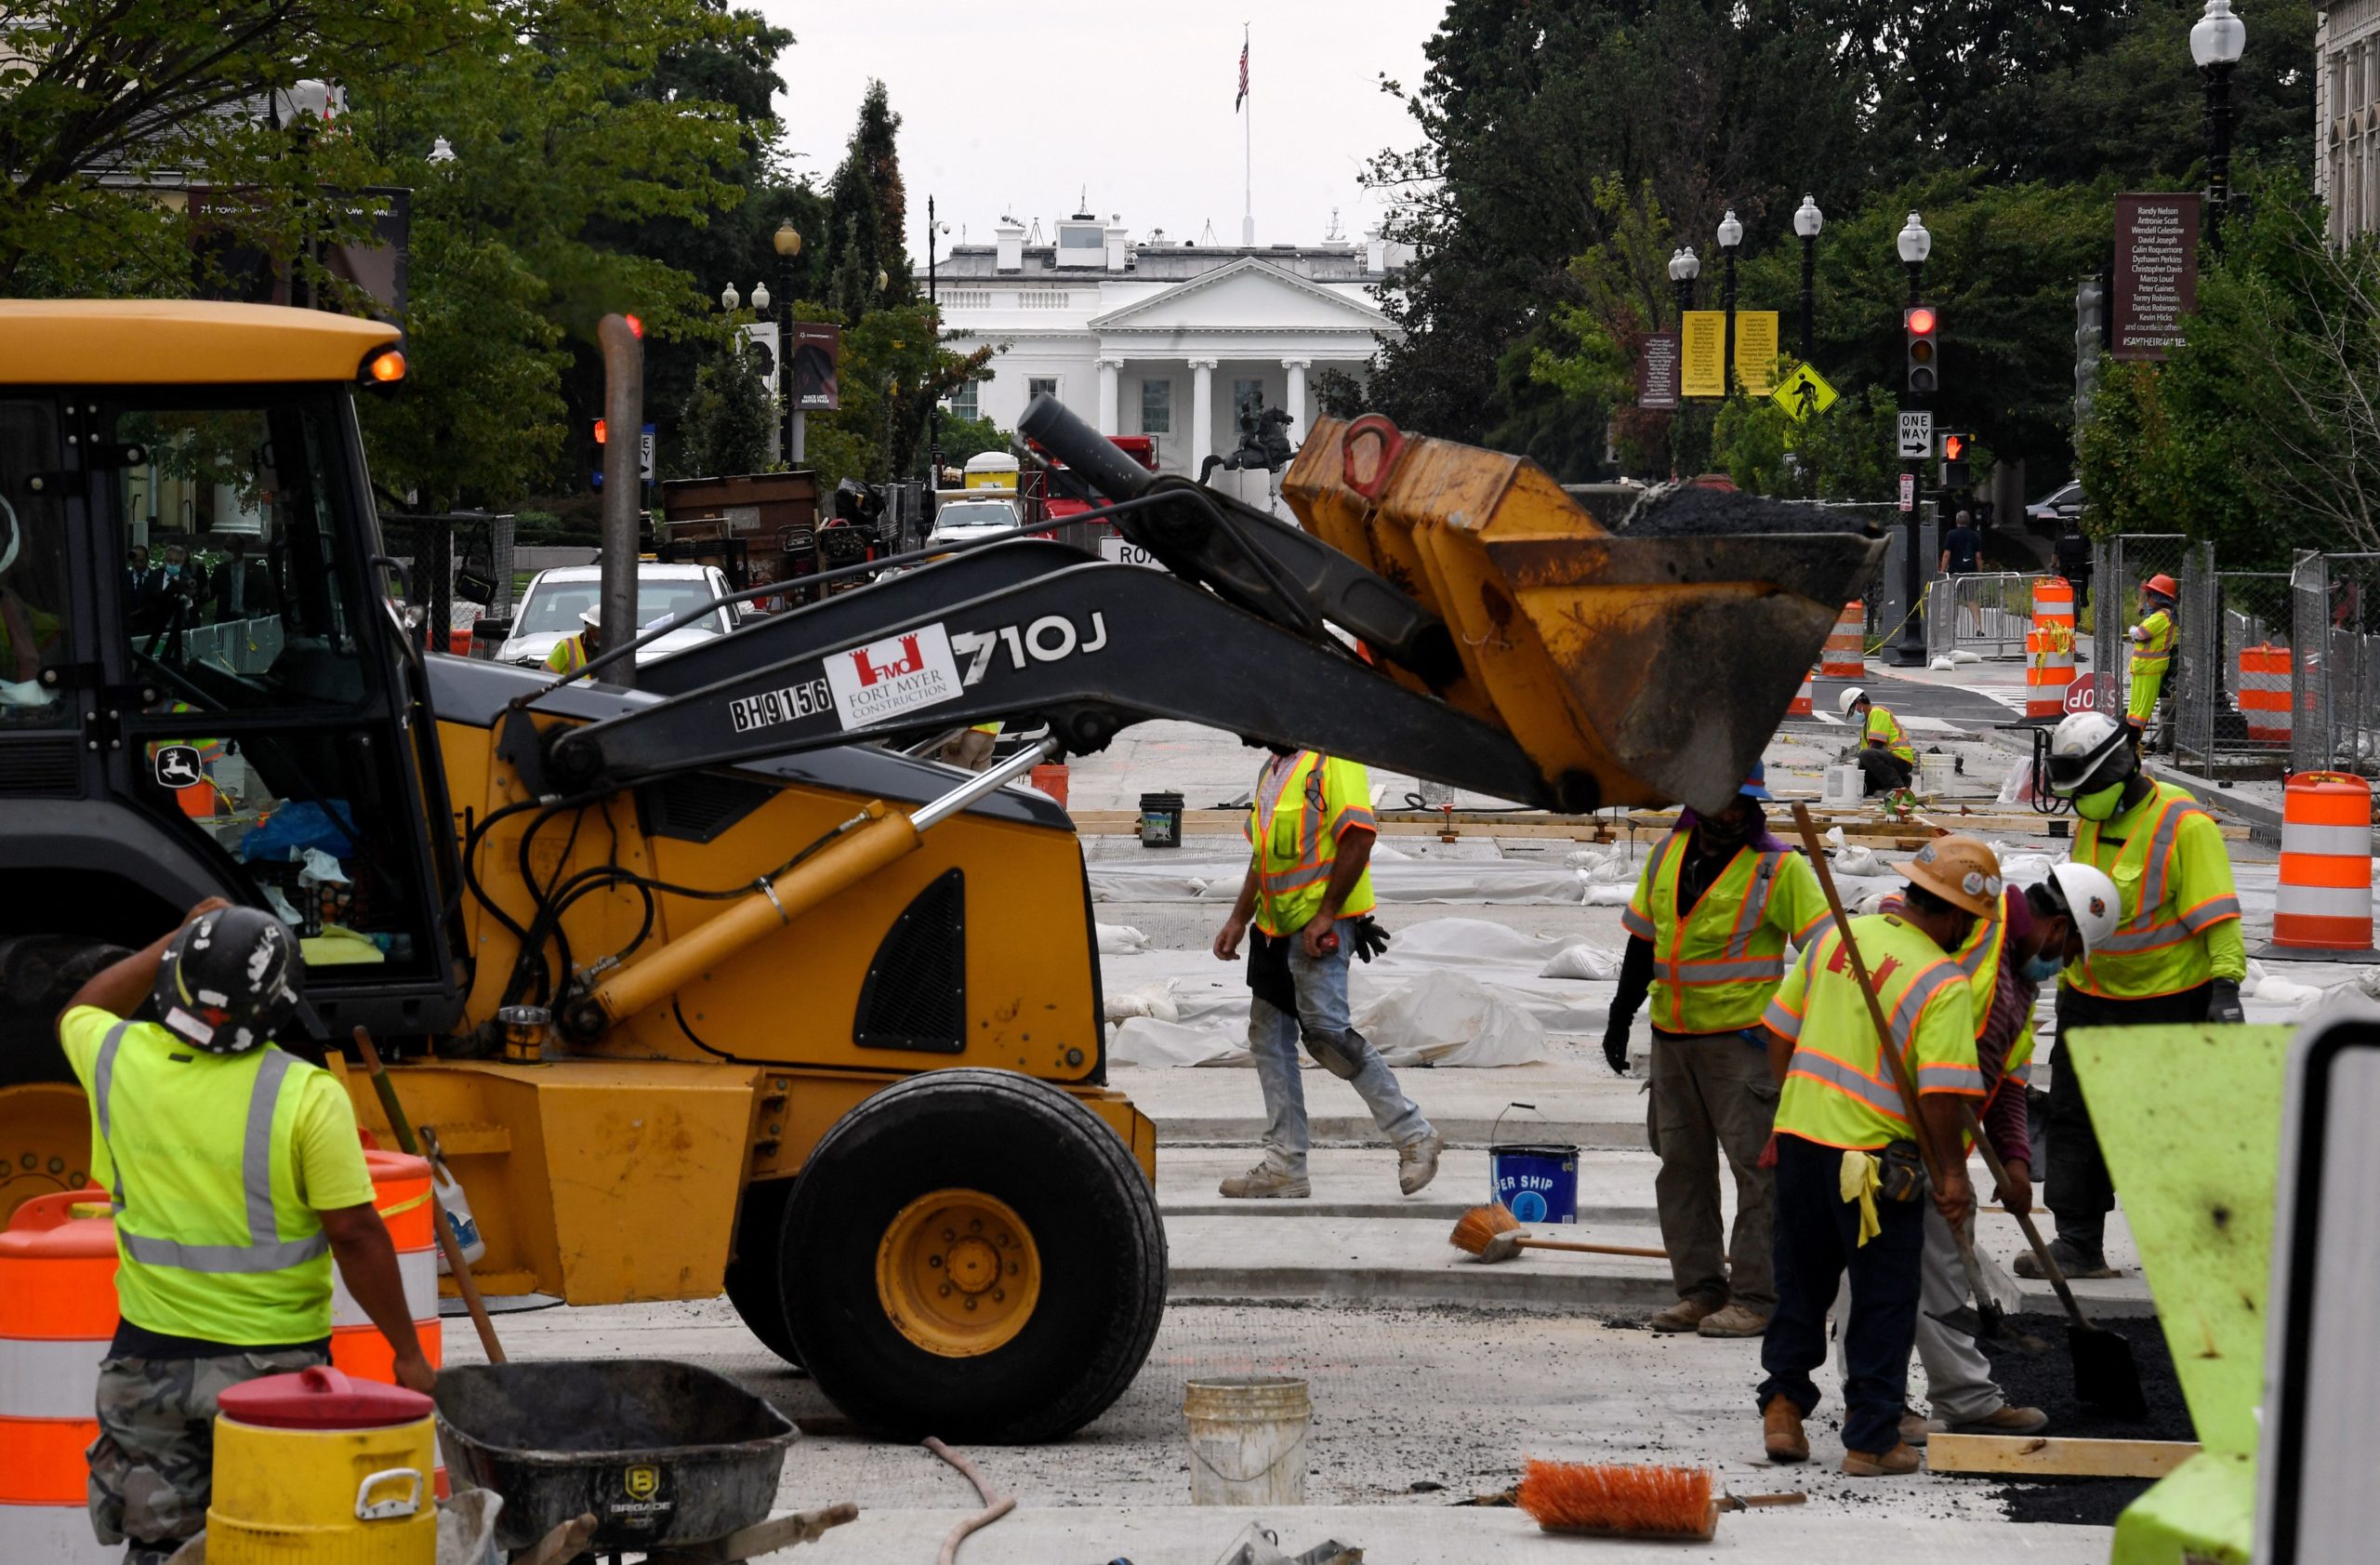 Construction workers repair a street near the White House on Tuesday. (Olivier Douliery/AFP via Getty Images)